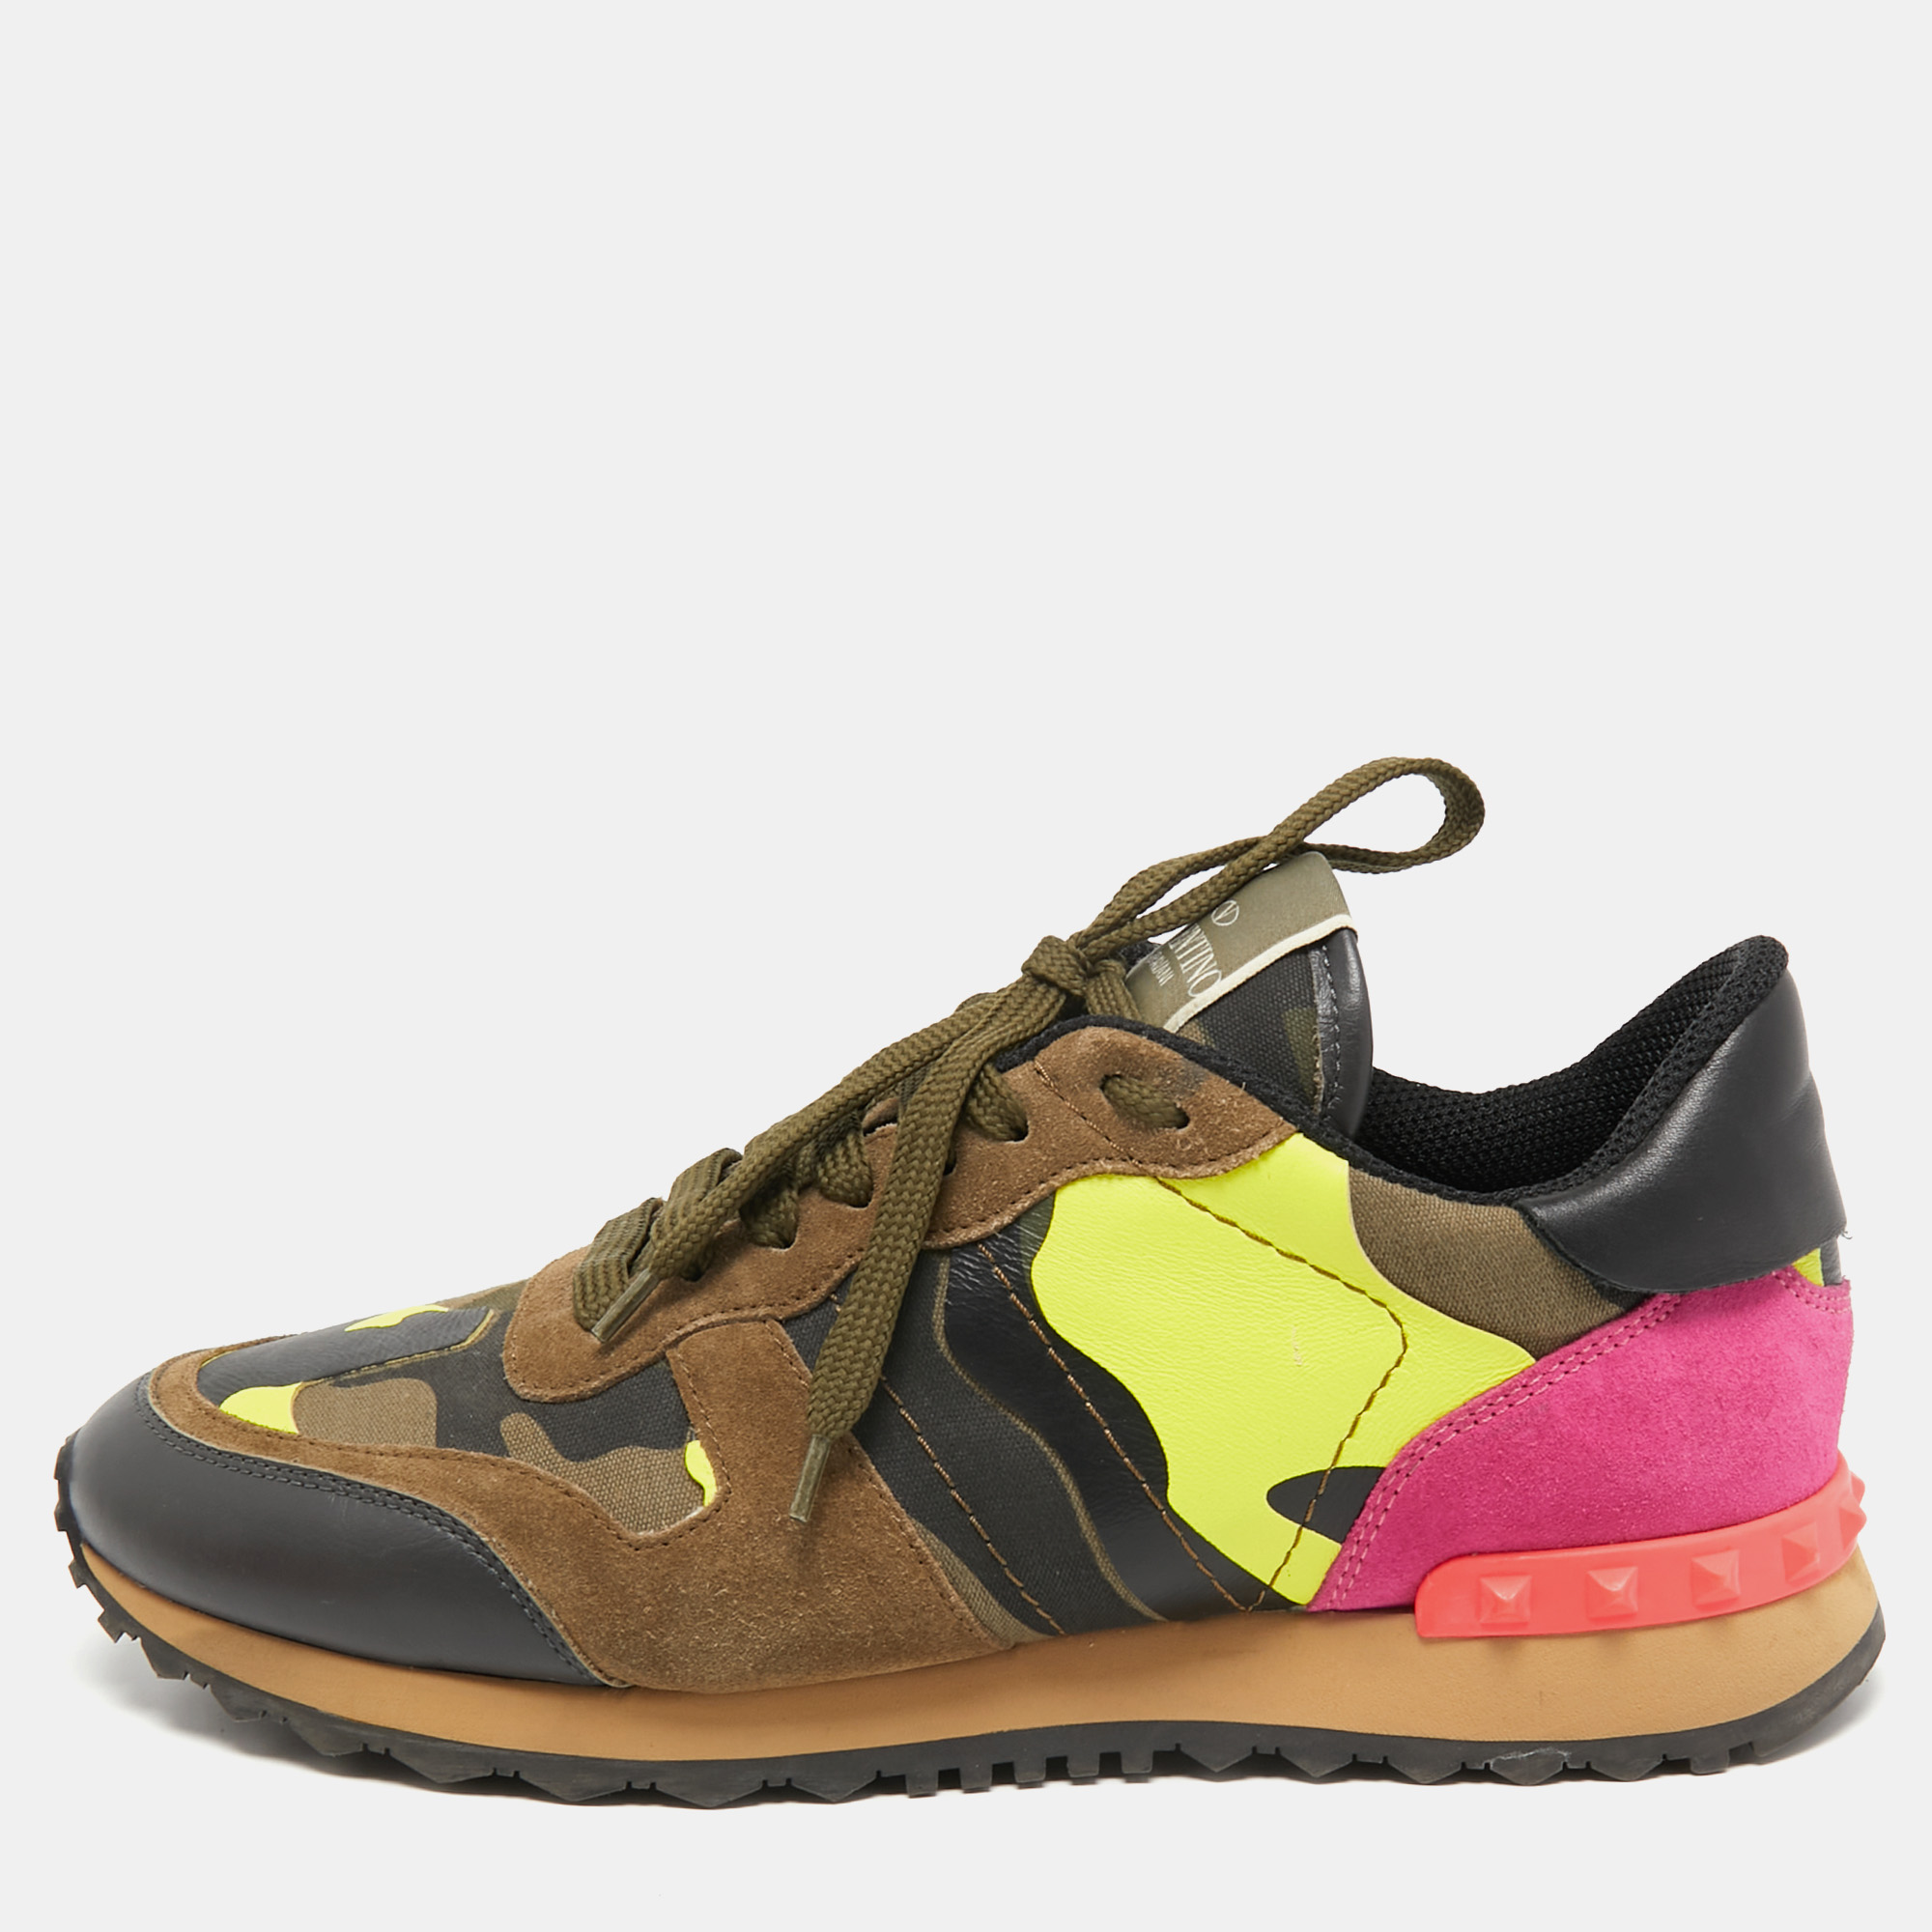 Pre-owned Valentino Garavani Multicolor Camo Print Canvas, Leather And Suede Rockrunner Sneakers Size 40